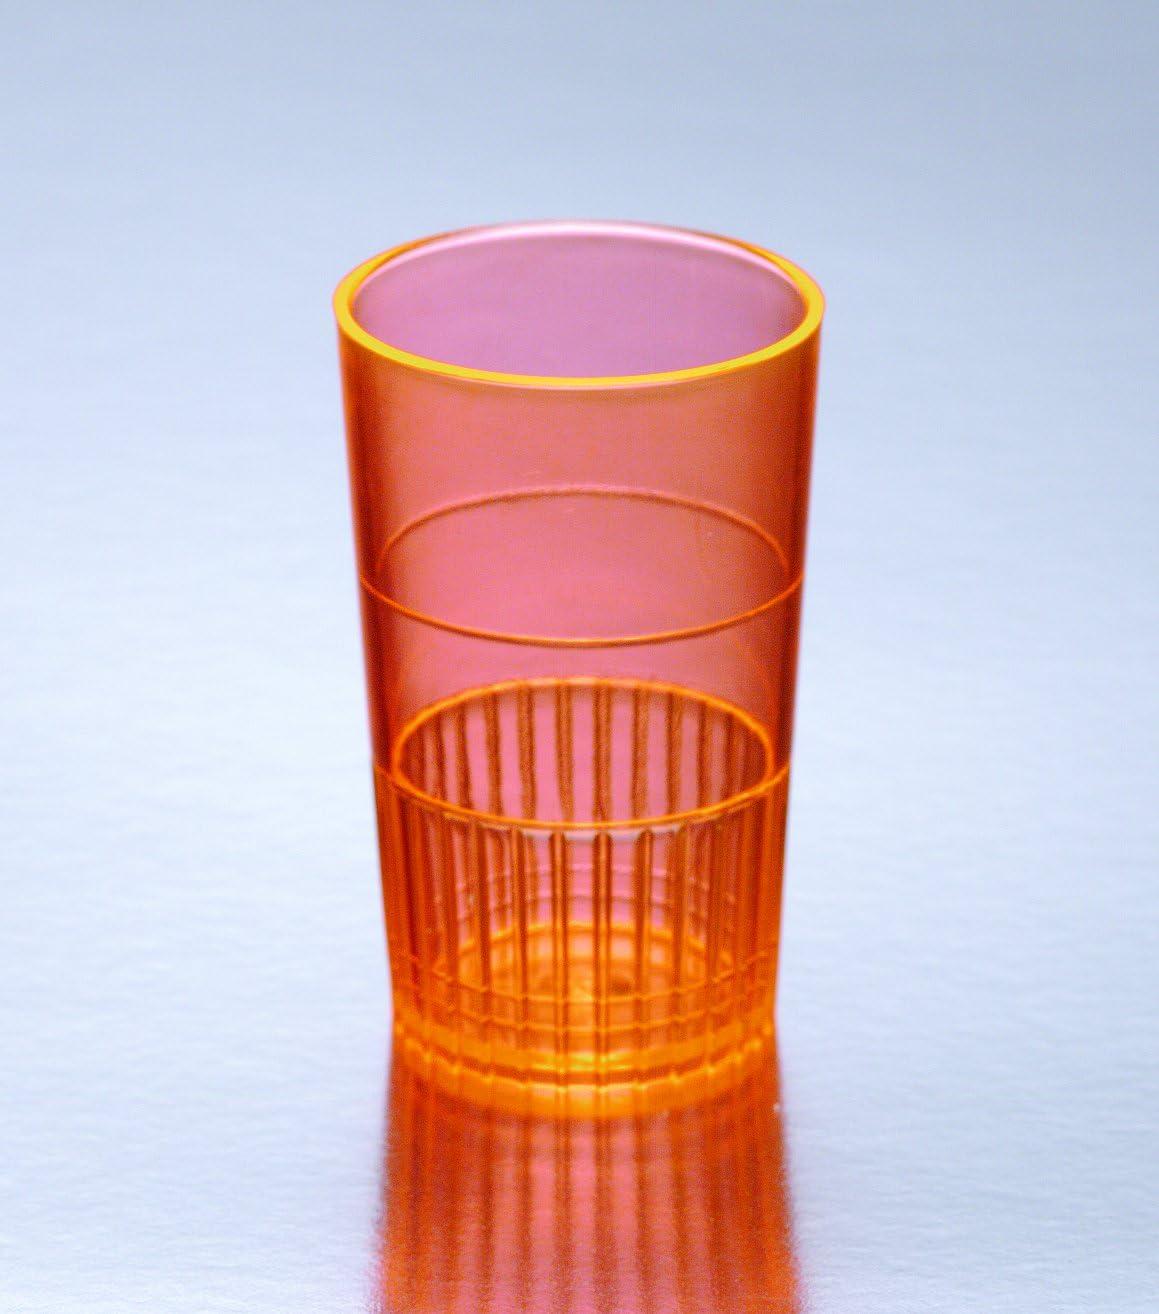 100 ct Disposable Shot Glasses Drinkware Hard Plastic Cups Party Bar 1.5oz Clear